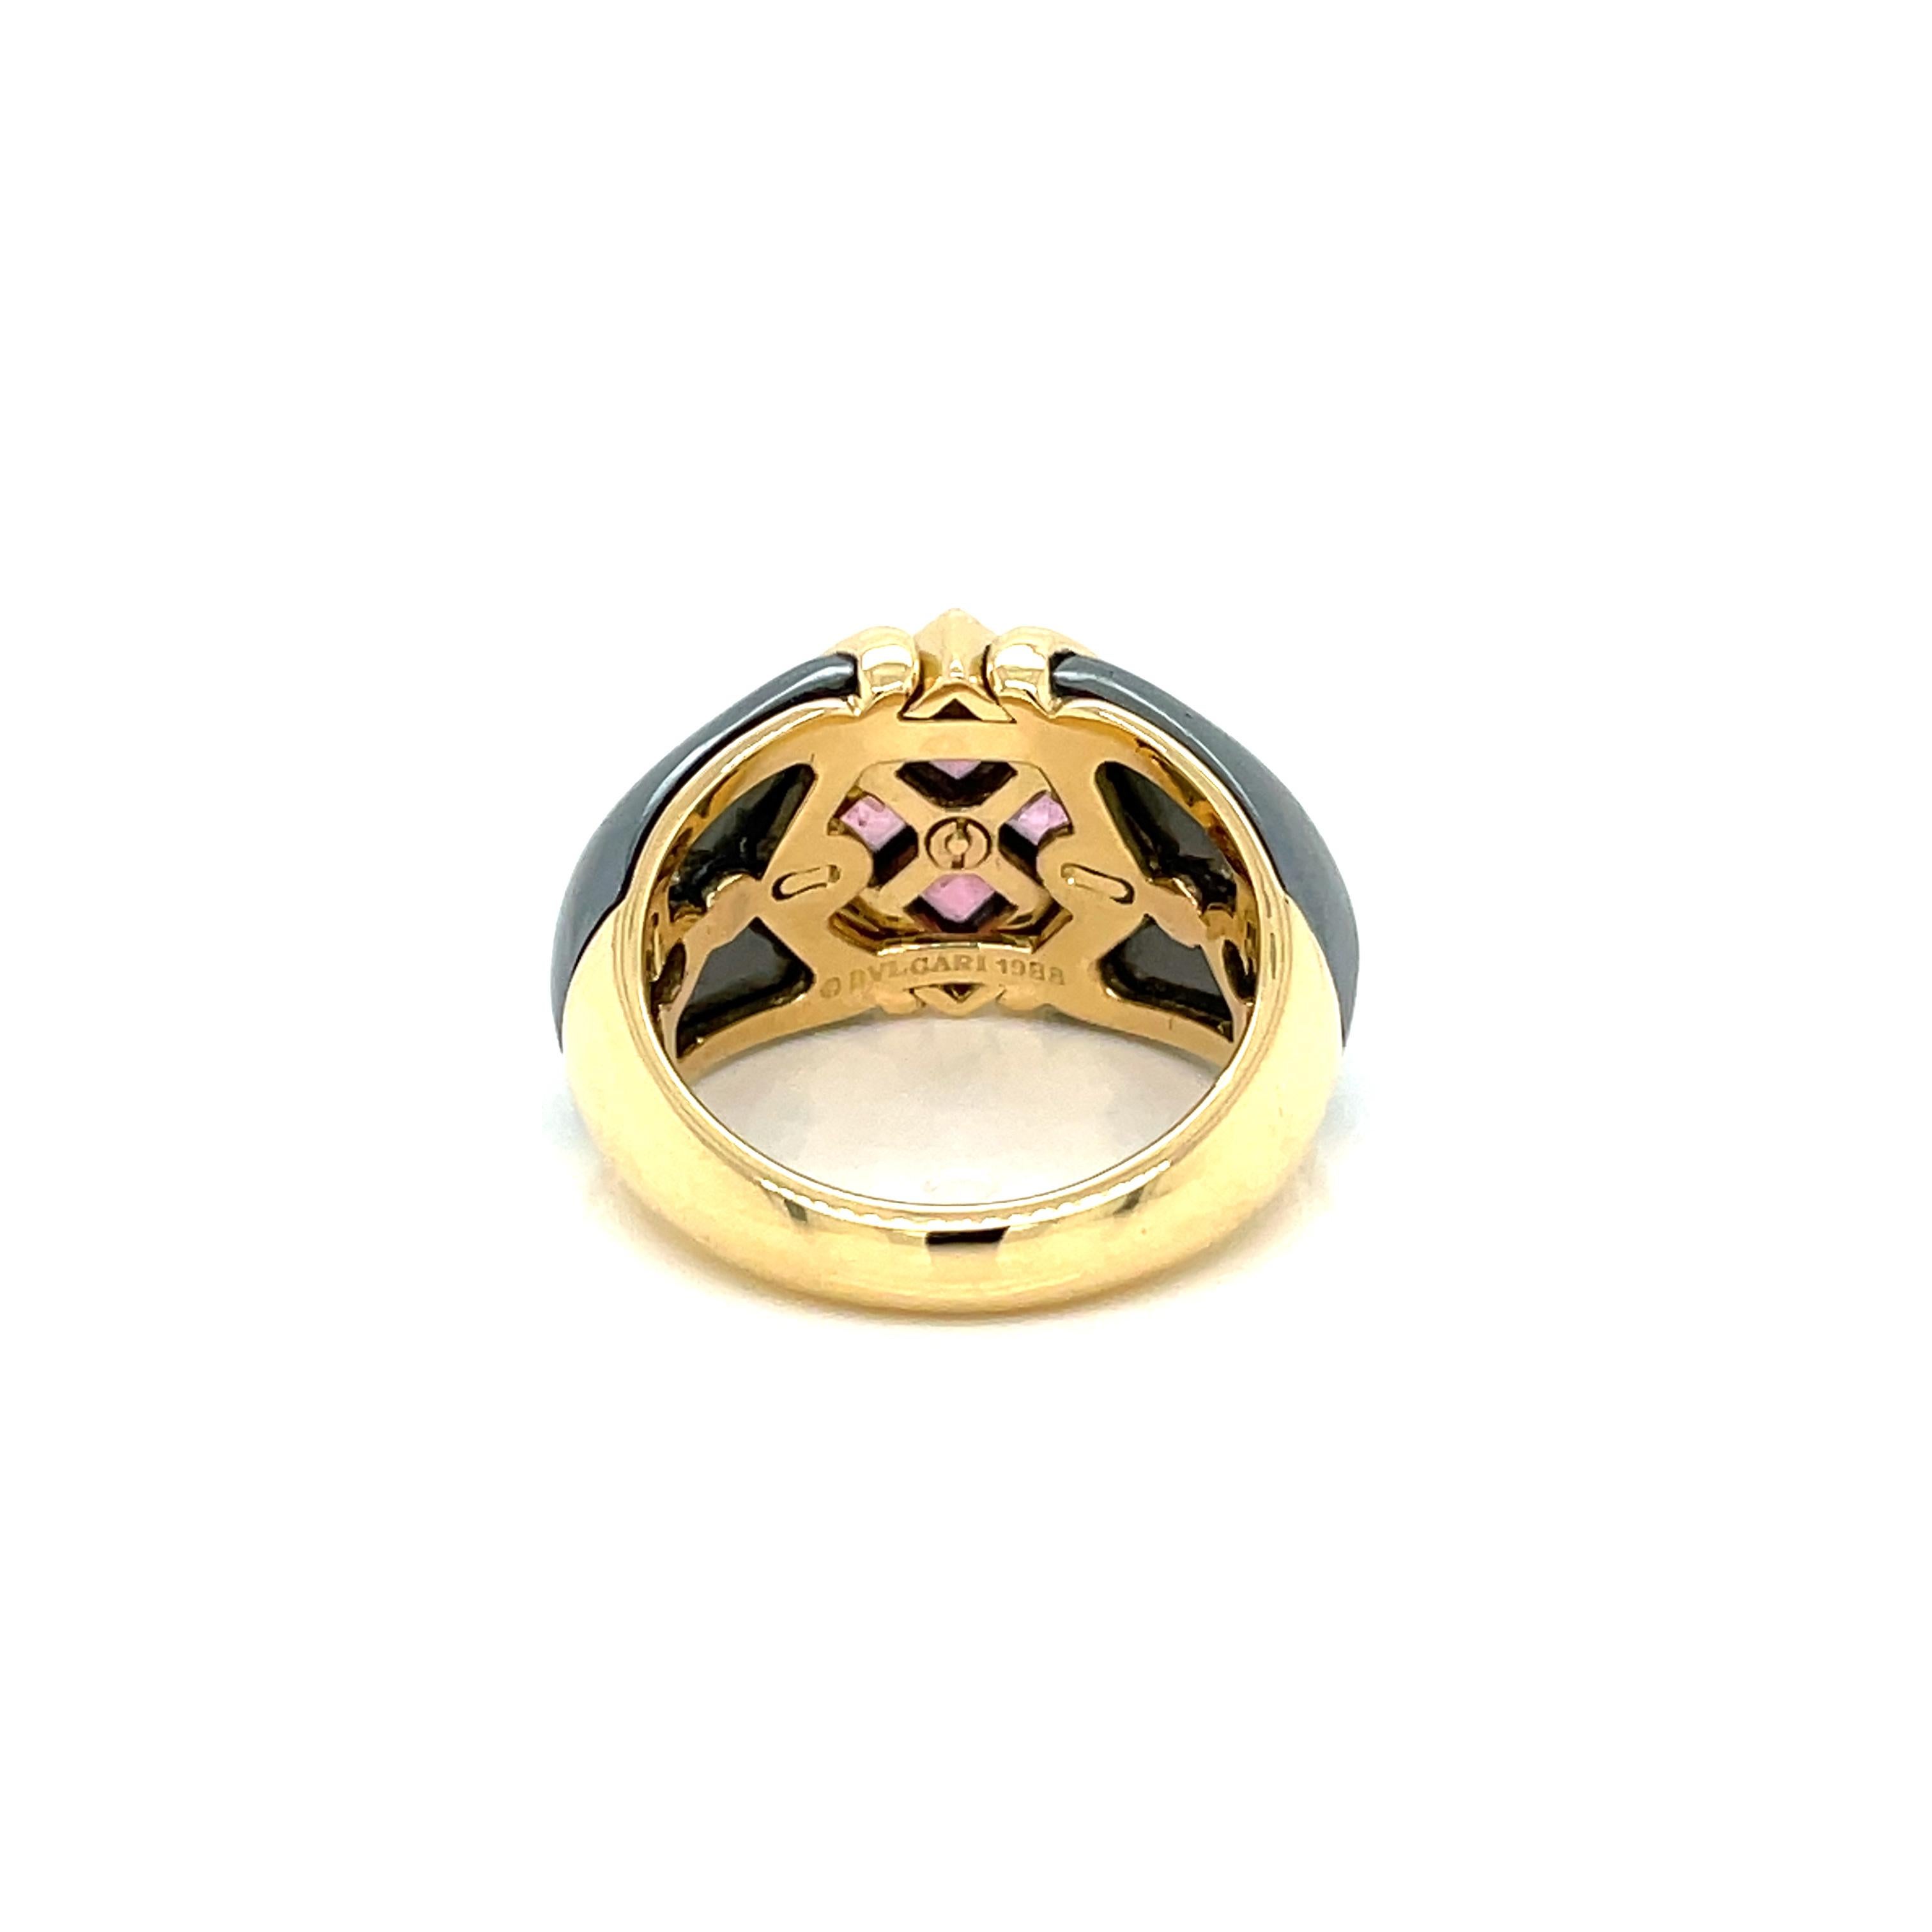 Bulgari Hematite & Tourmaline Gold Ring In Excellent Condition For Sale In Napoli, Italy